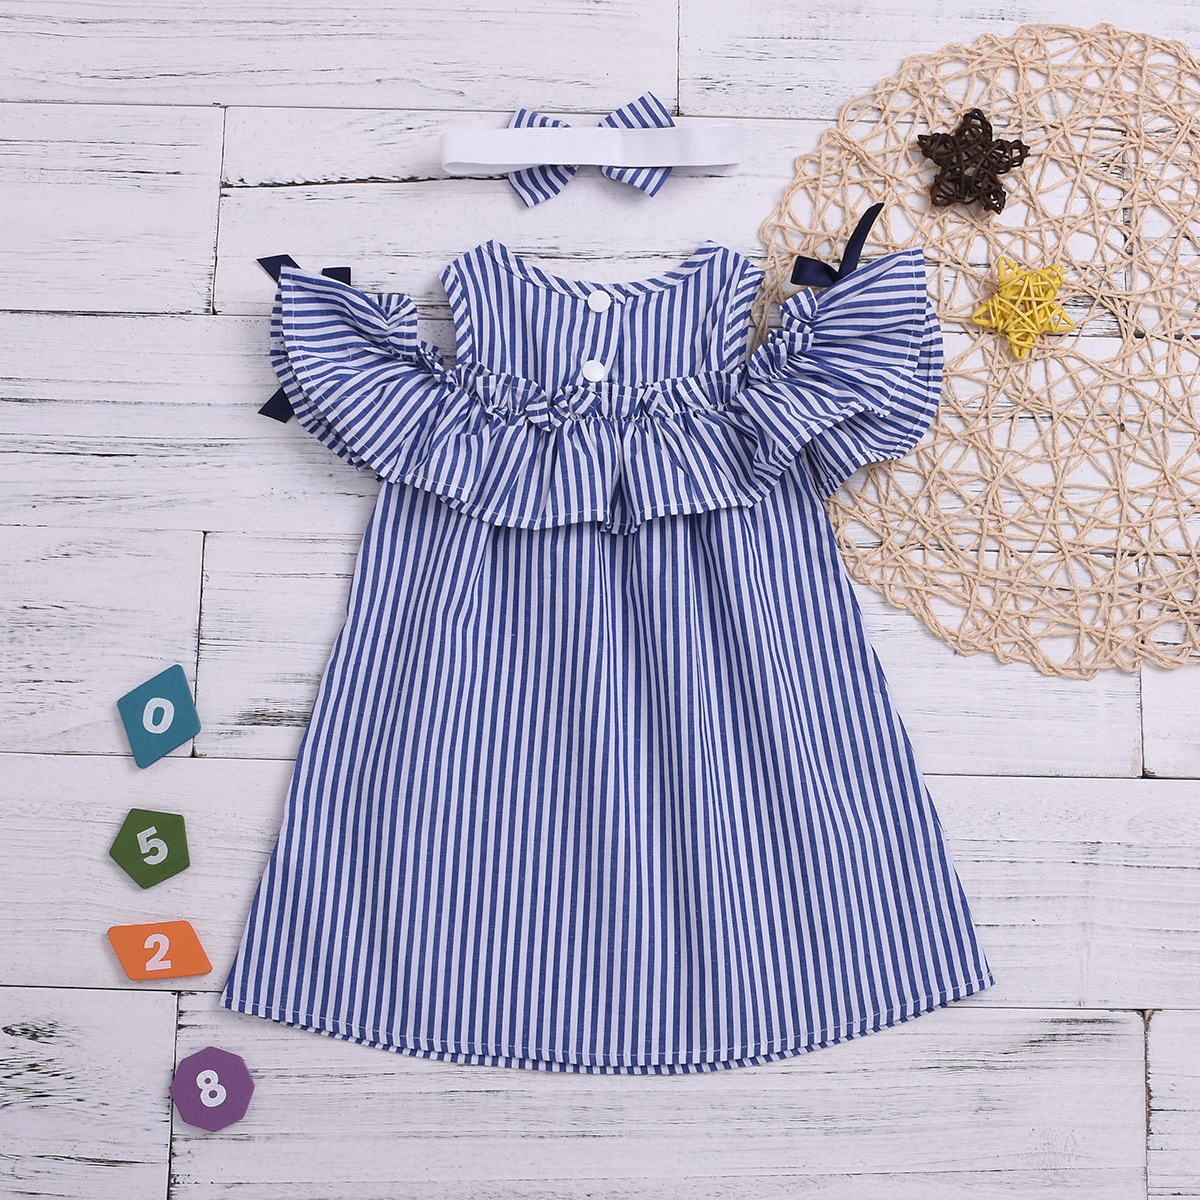 Hot New Summer Dress Toddler Kids Baby Girls Lovely Birthday Clothes Blue Striped Off-shoulder Ruffles Party Gown Dresses